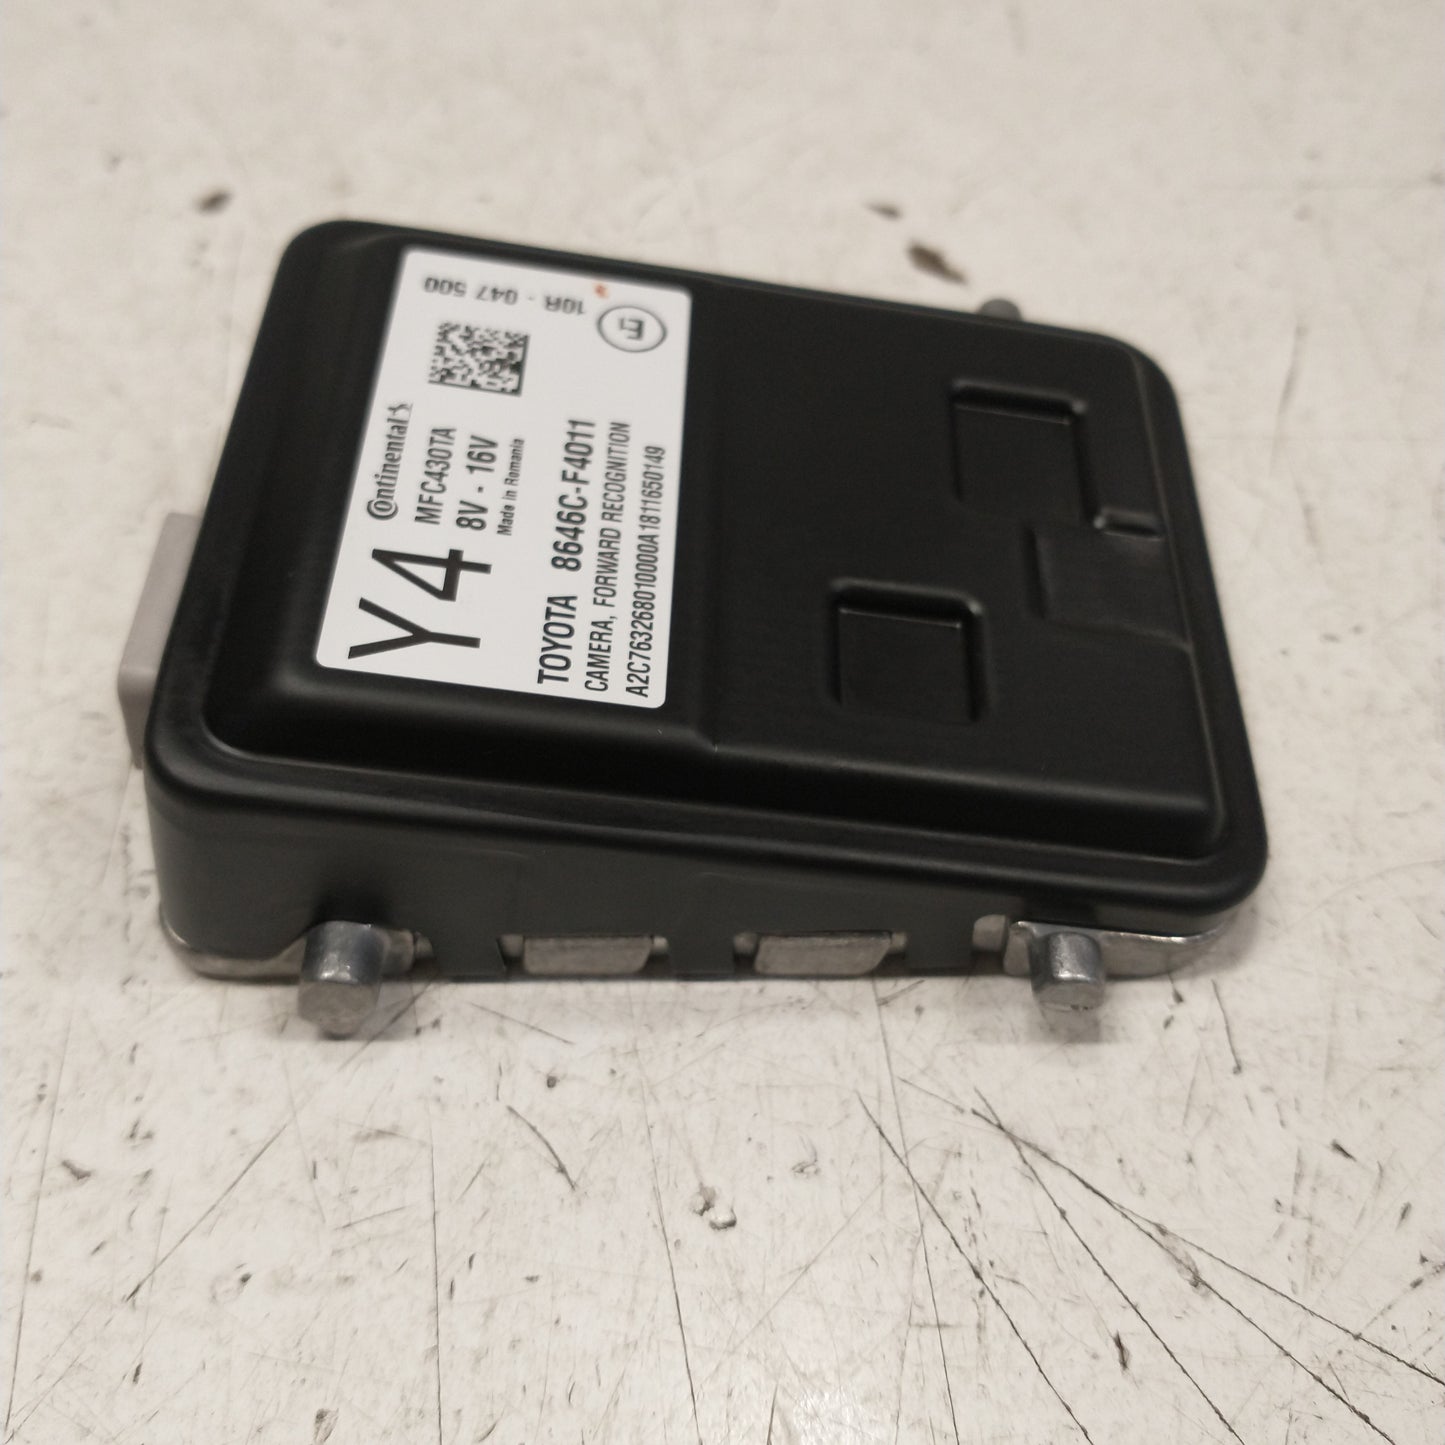 Toyota CHR Forward Recognition Camera Part No. 8646C-F4011 2016 2017 2018 2019